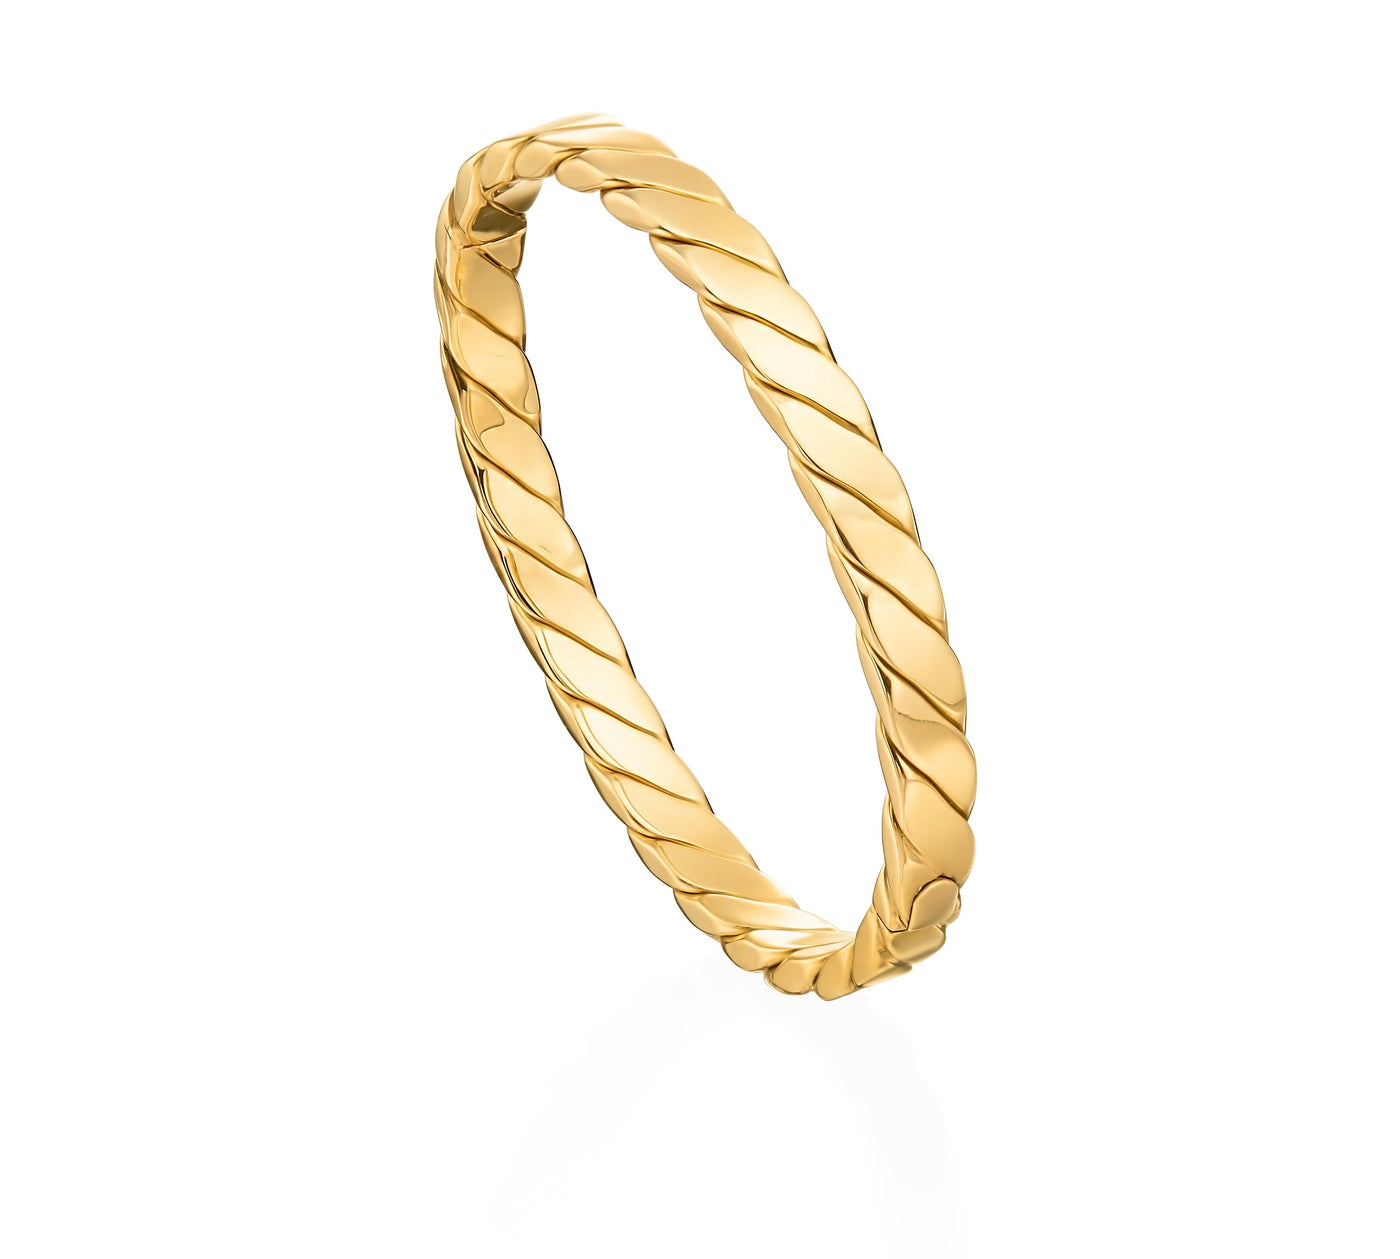 Bangle With Twisted Design